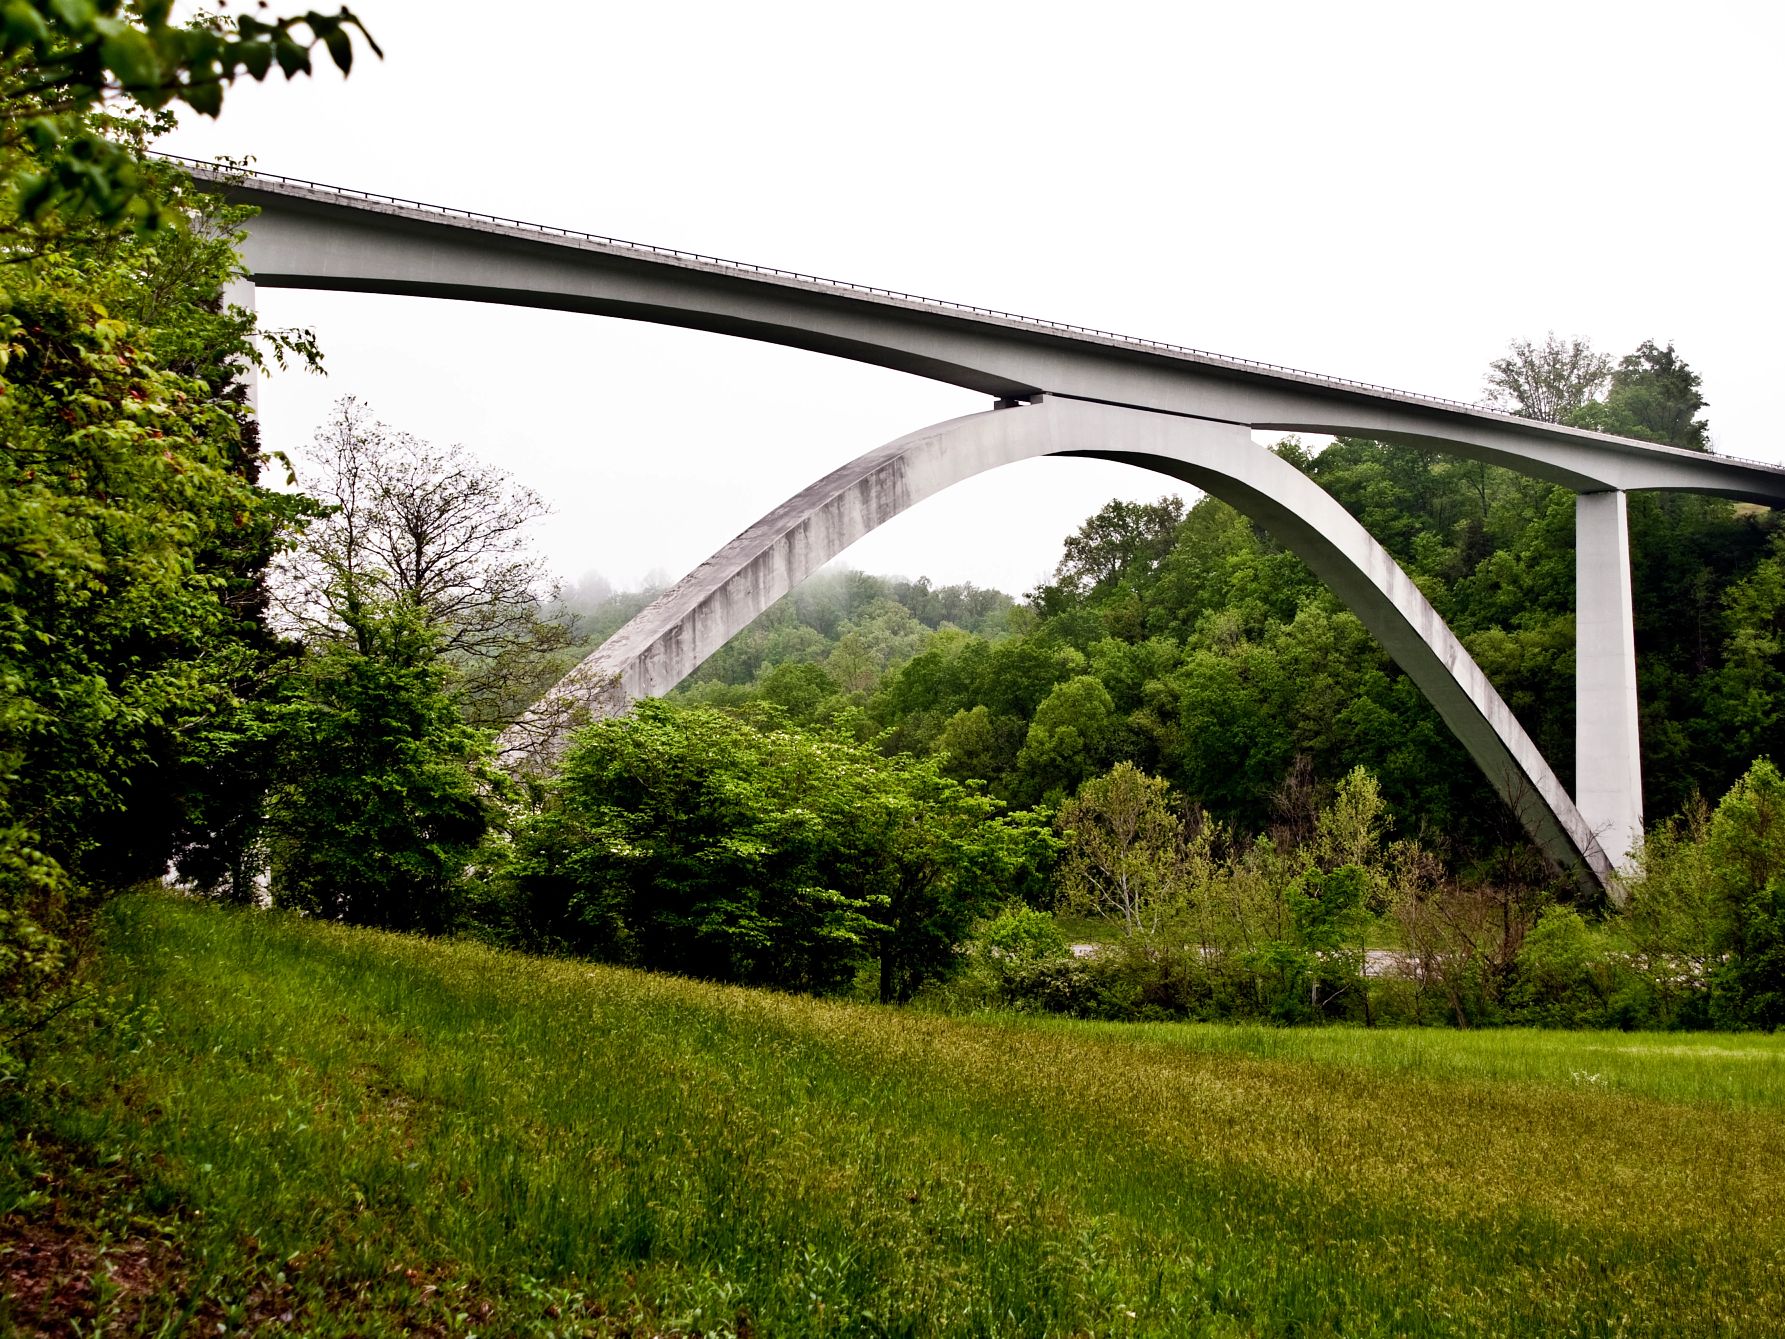 scenic view of the Natchez Trace Parkway Bridge in Tennessee